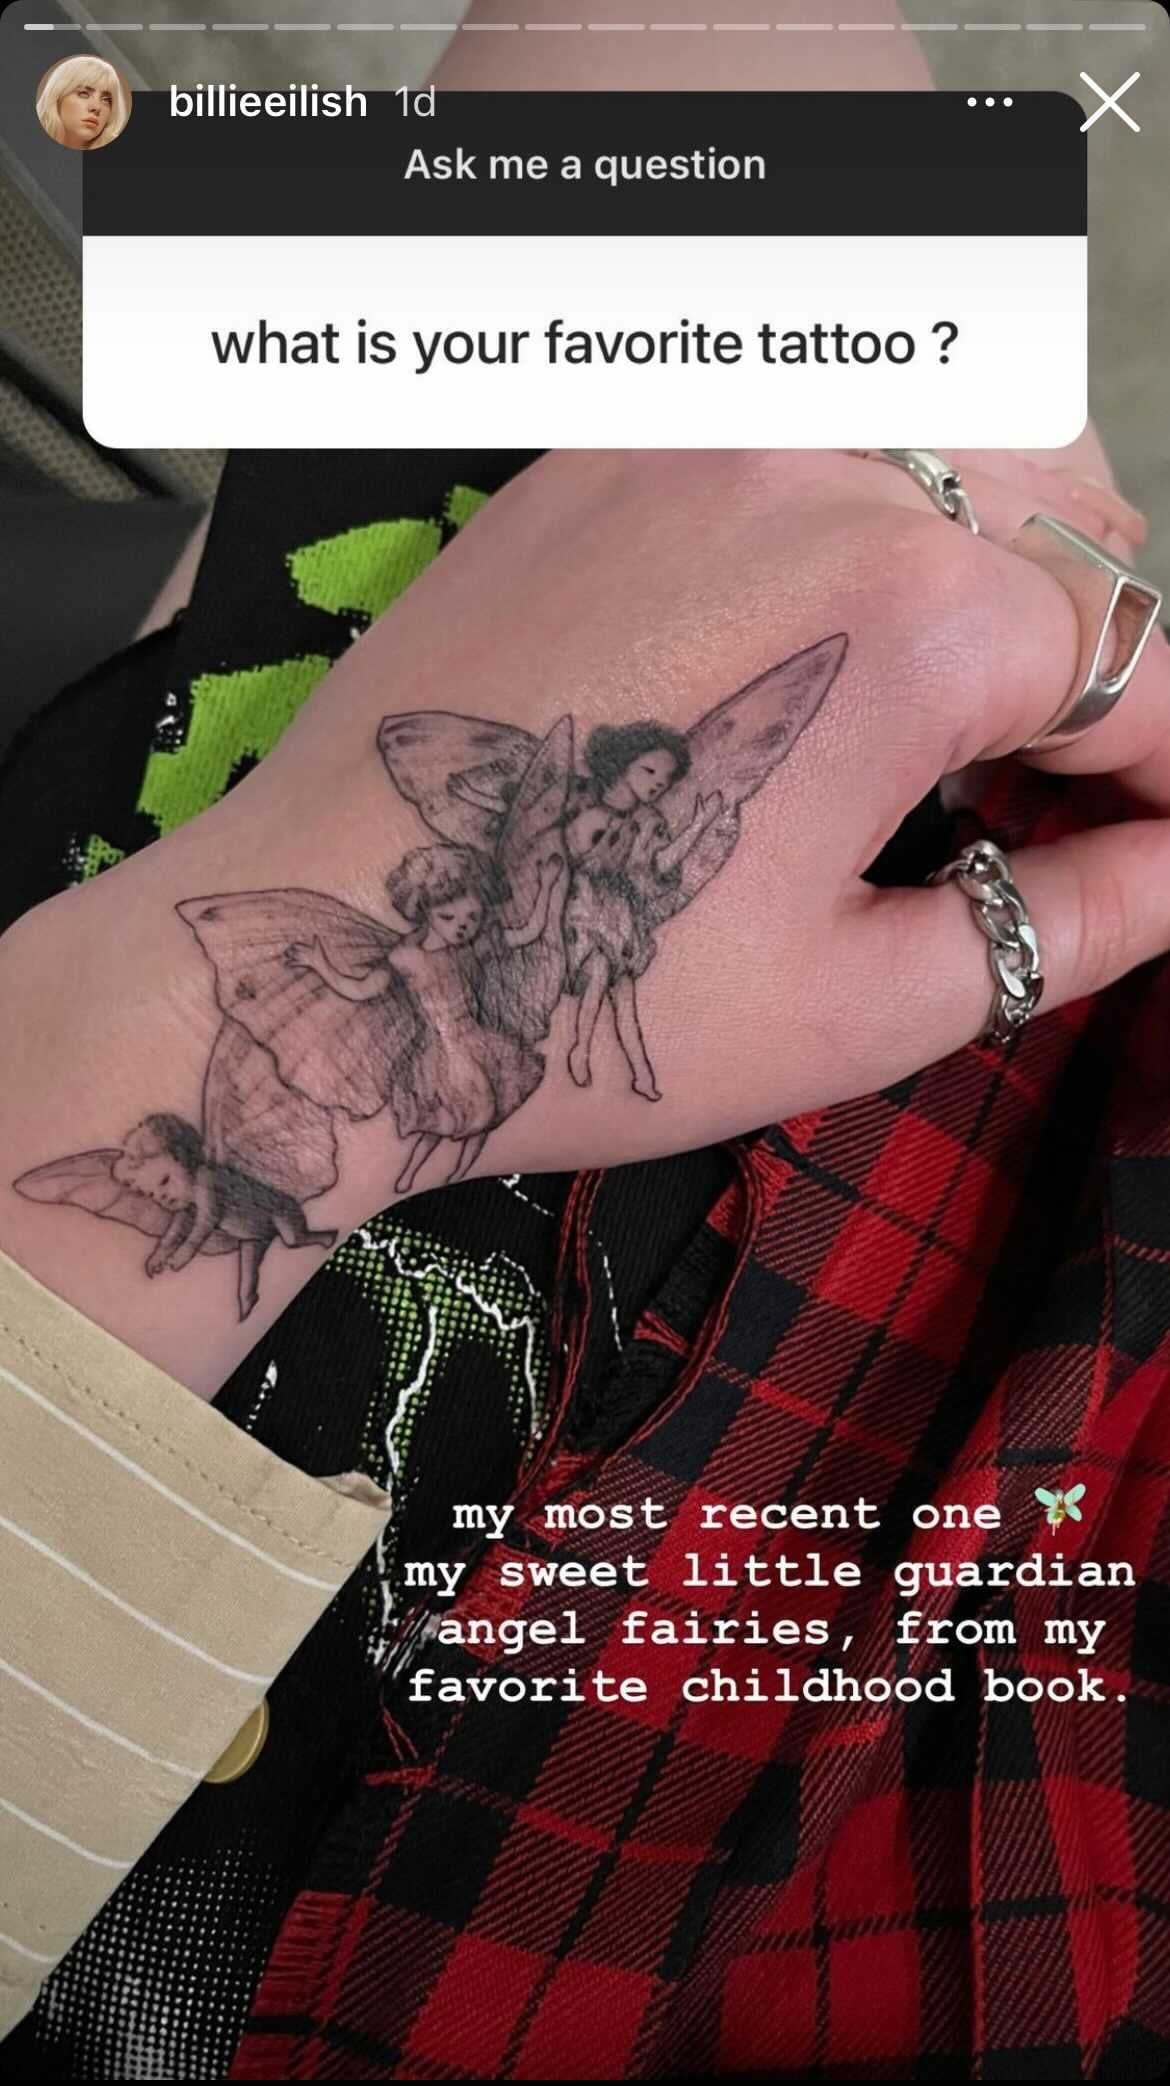 Billie Eilish Shows Off Intimate Tattoo She Vowed Fans would Never See